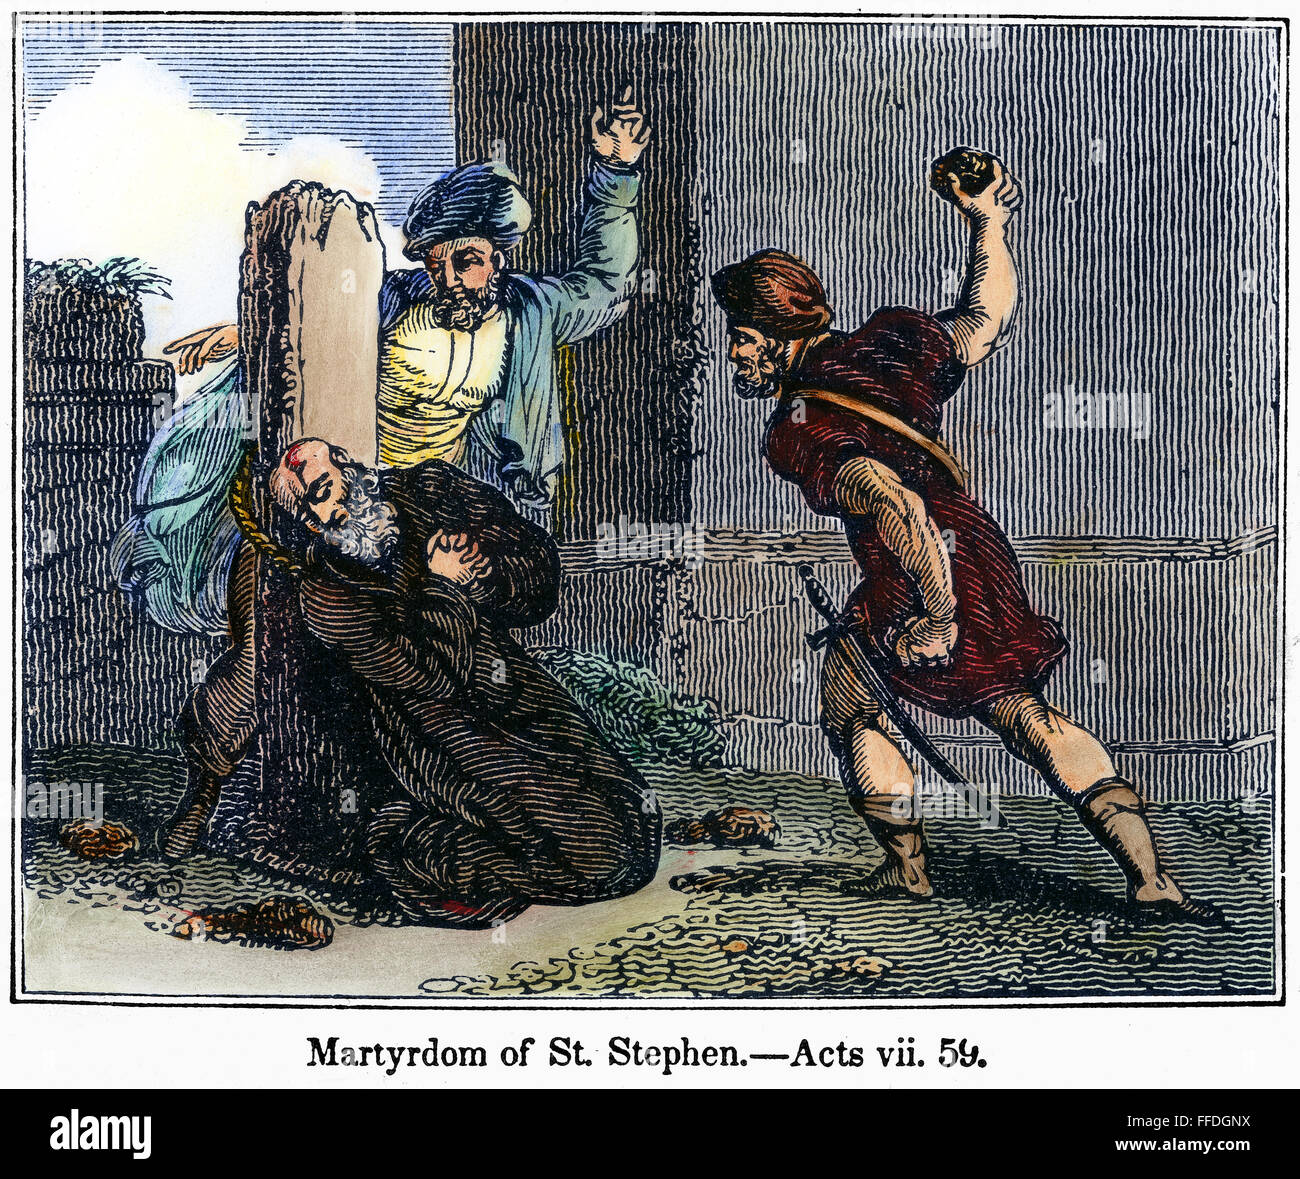 MARTYRDOM OF ST. STEPHEN. /nSt. Stephen stoned to death in Jerusalem, c35 A.D. Wood engraving, American, c1840. Stock Photo